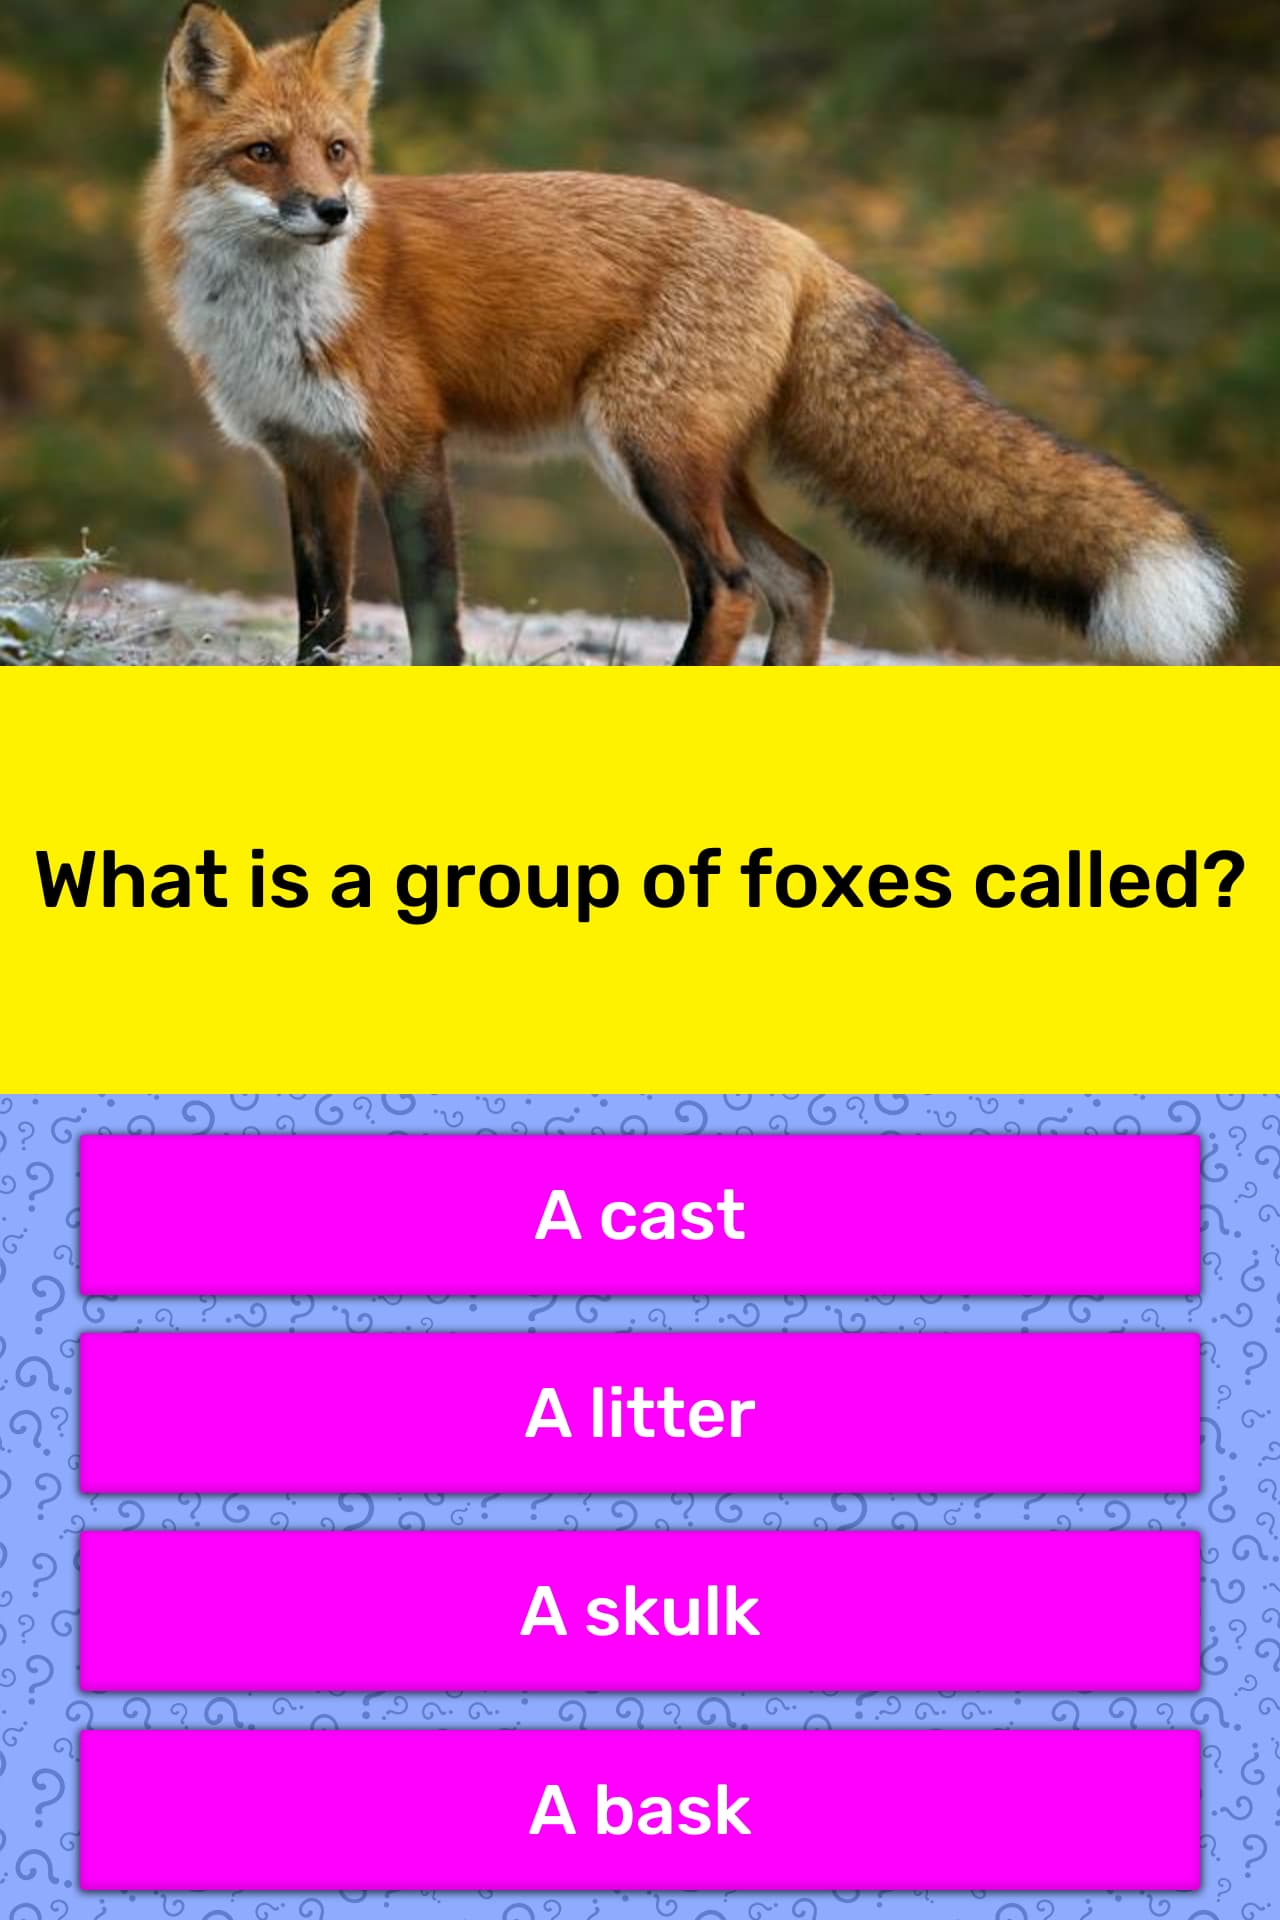 What is a small group of foxes called?